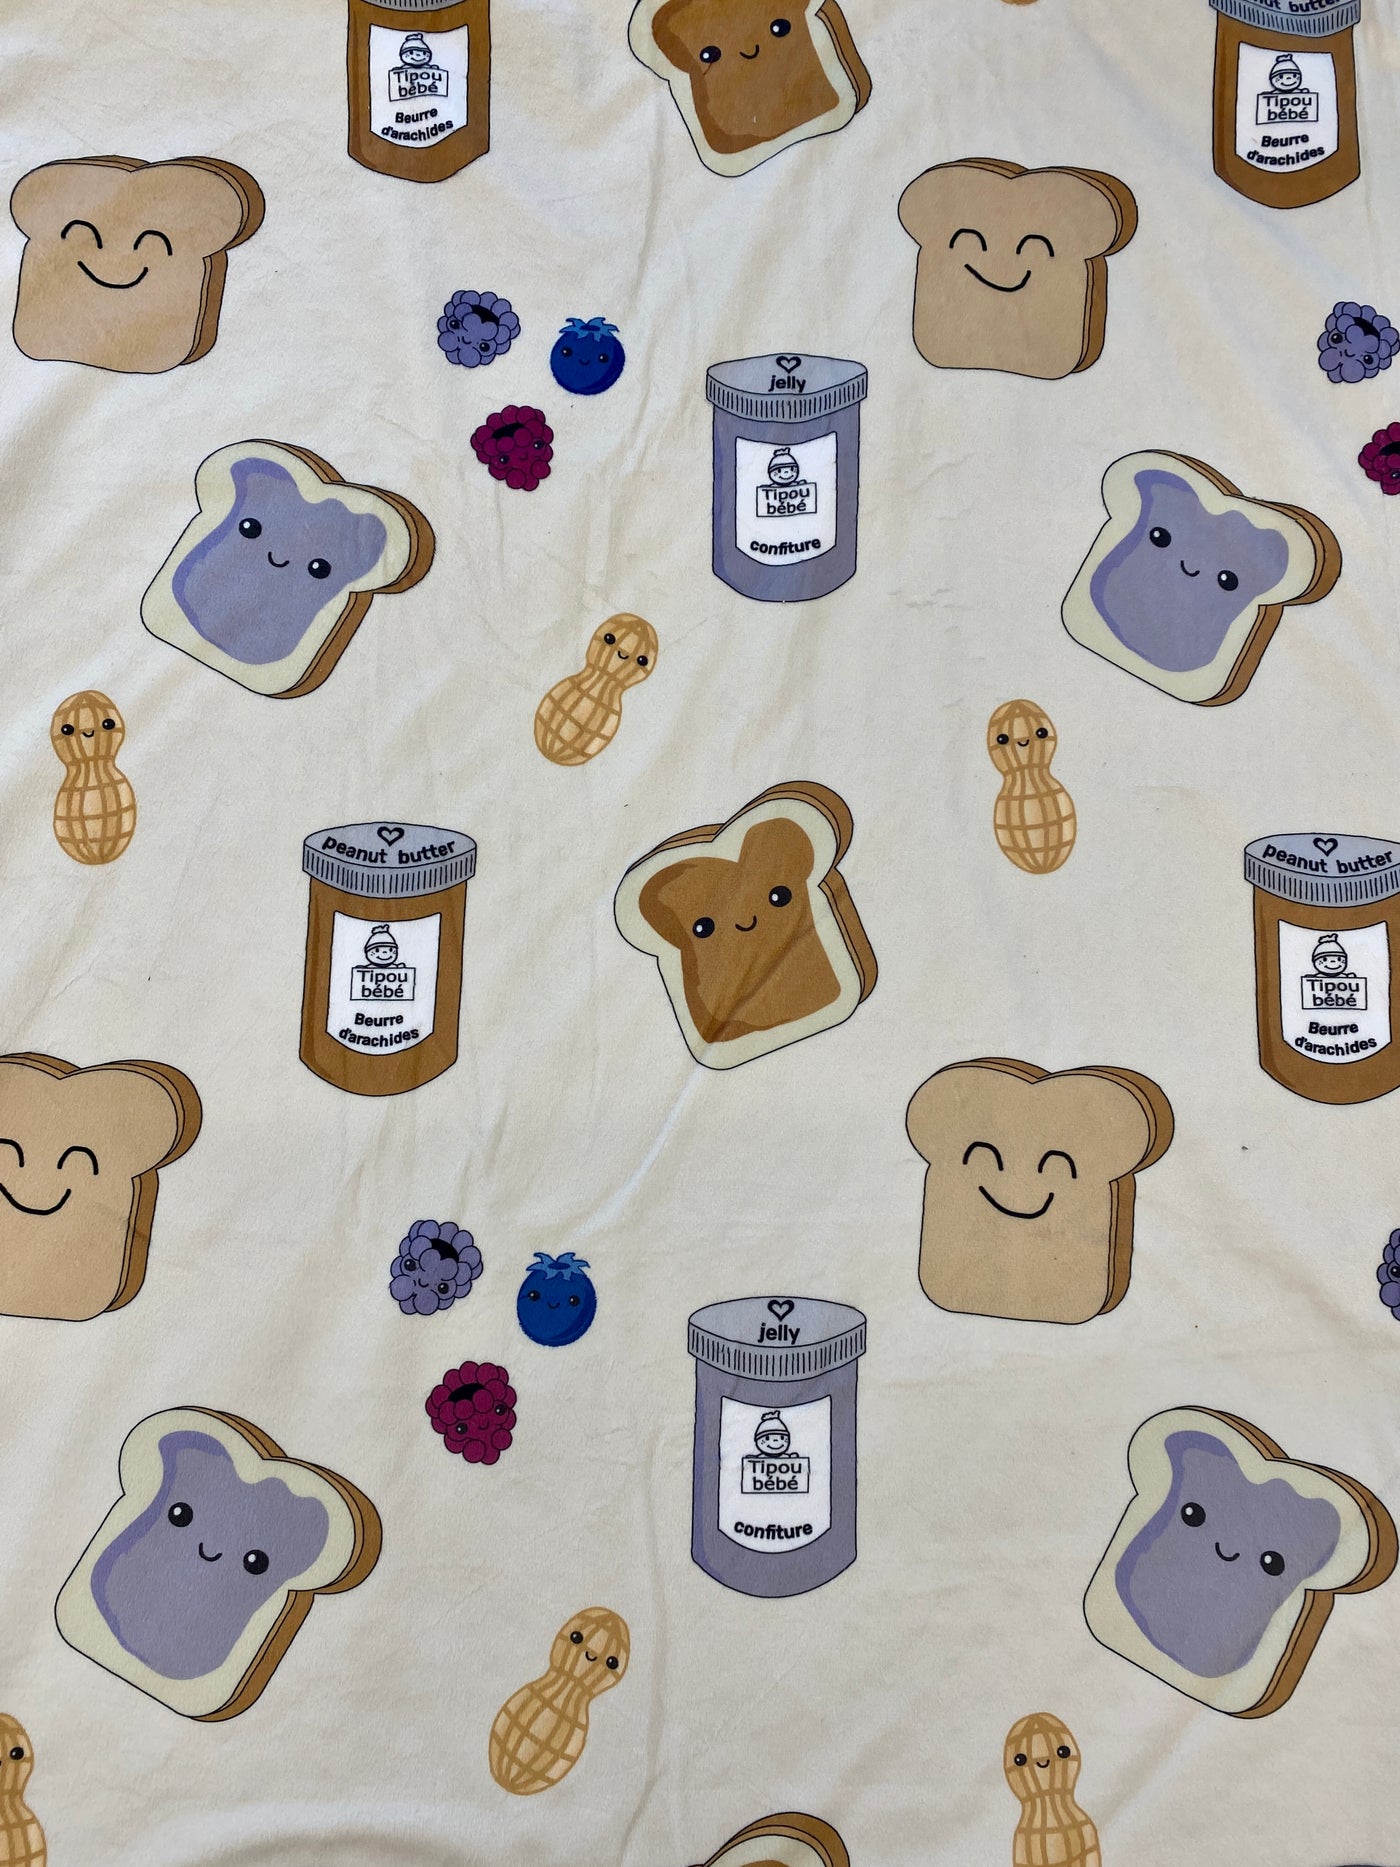 Giant blanket: Peanut Butter and Jelly